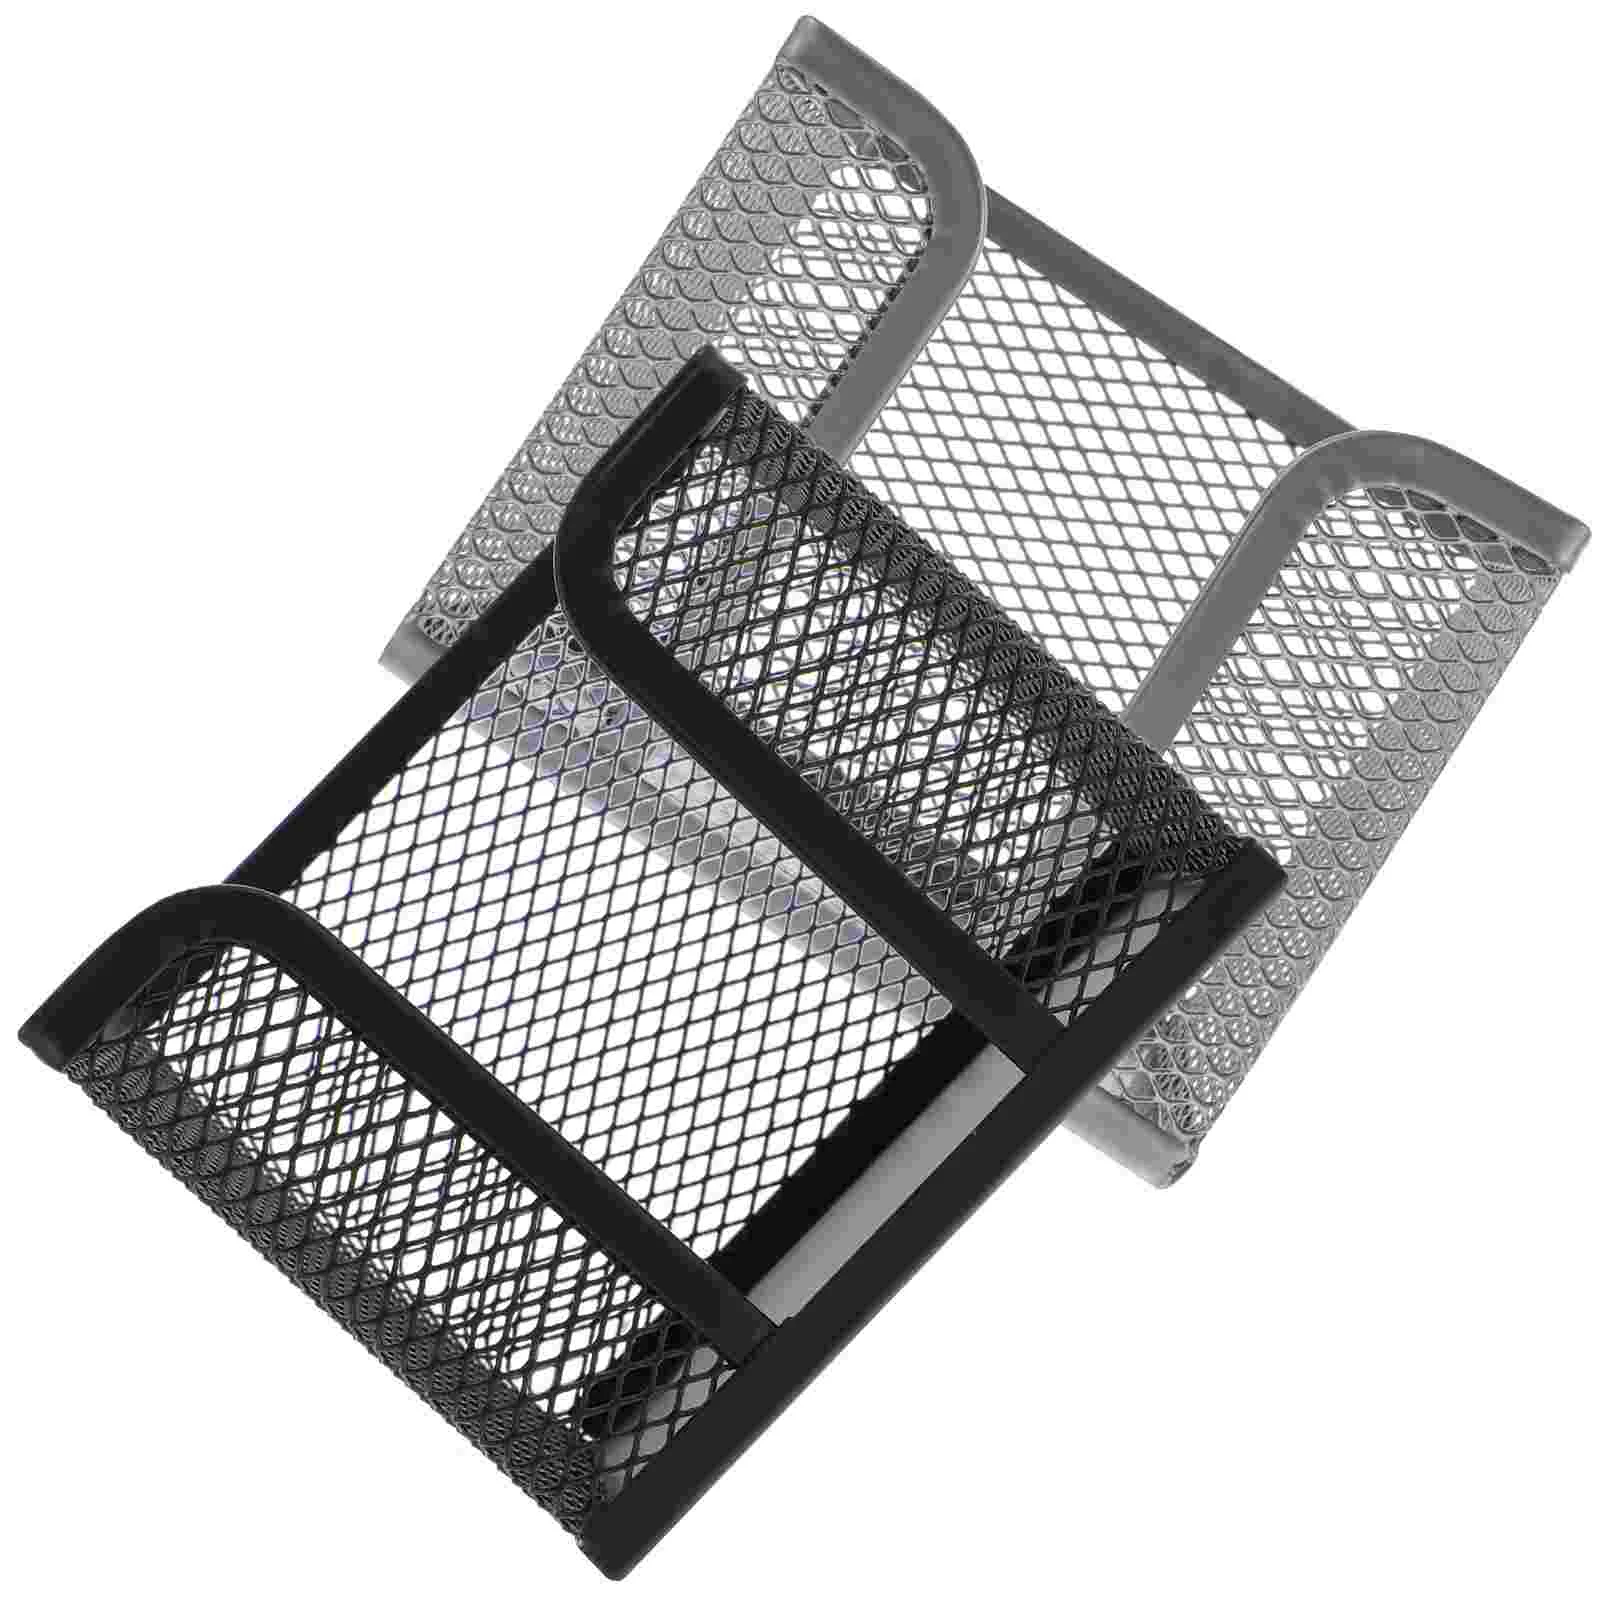 Metal Desk Memo Holders Note Paper Holders Mesh Holder Notepad Containers Office Home Desk Organizers